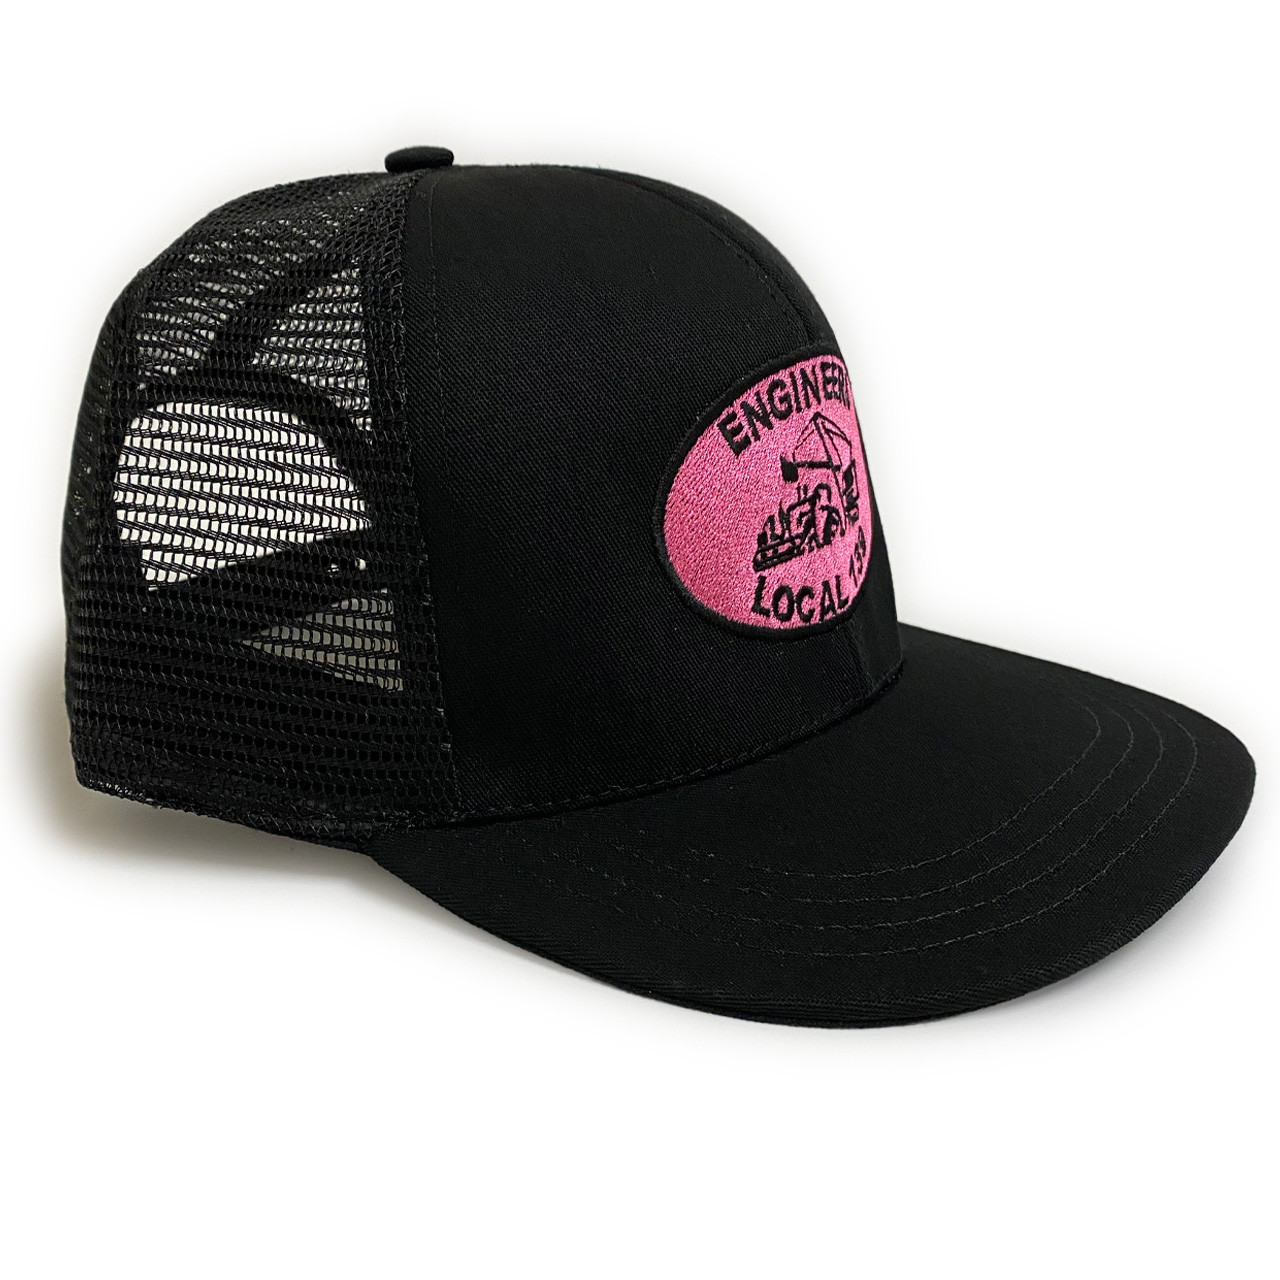 Local 139 Pink logo embroidered trucker hat - 139 Engineer Gear